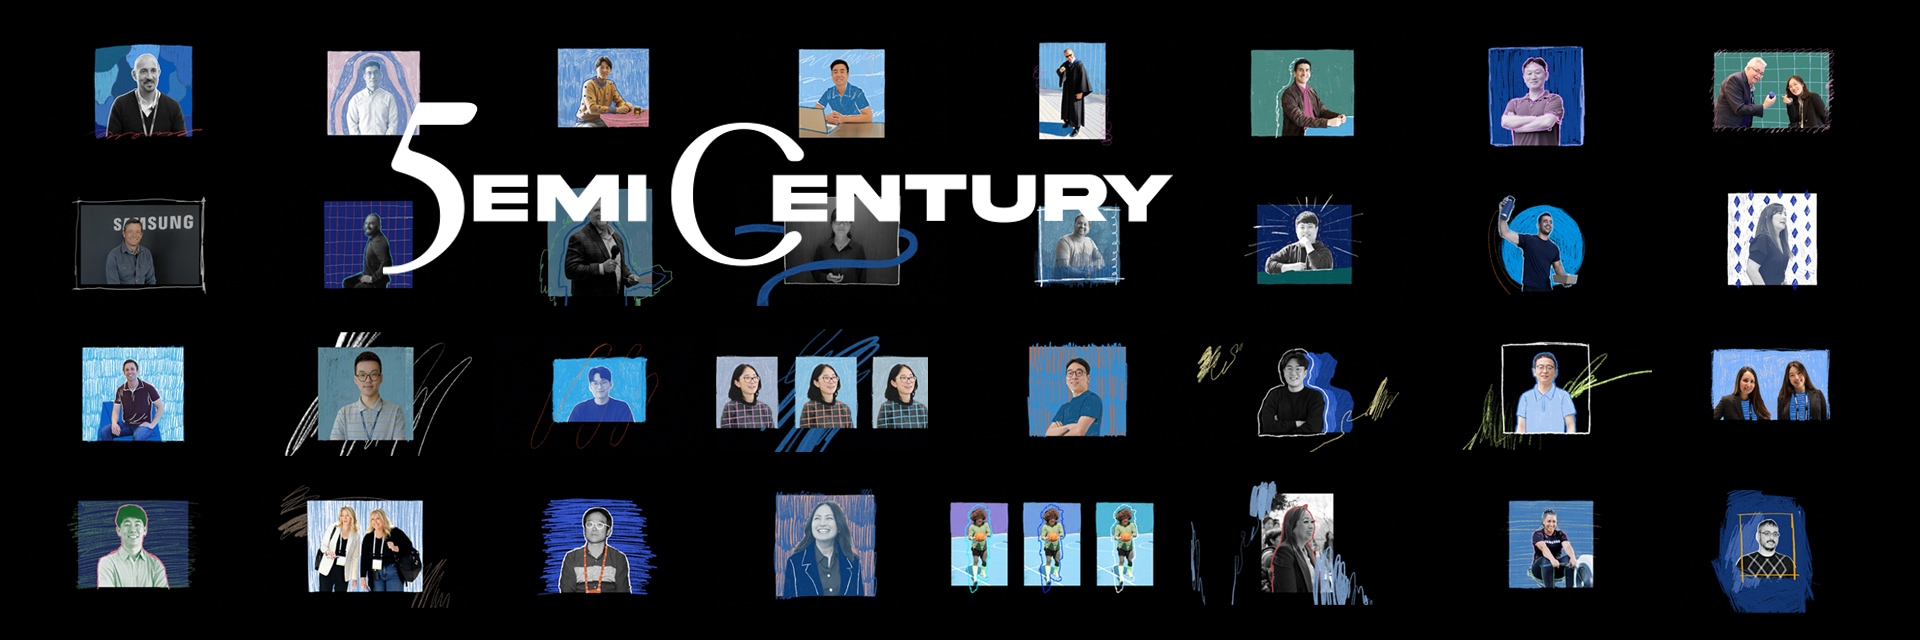 Collage of portraits of various individuals commemorating Samsung Semiconductor's 50th anniversary with the phrase "Semi Century".